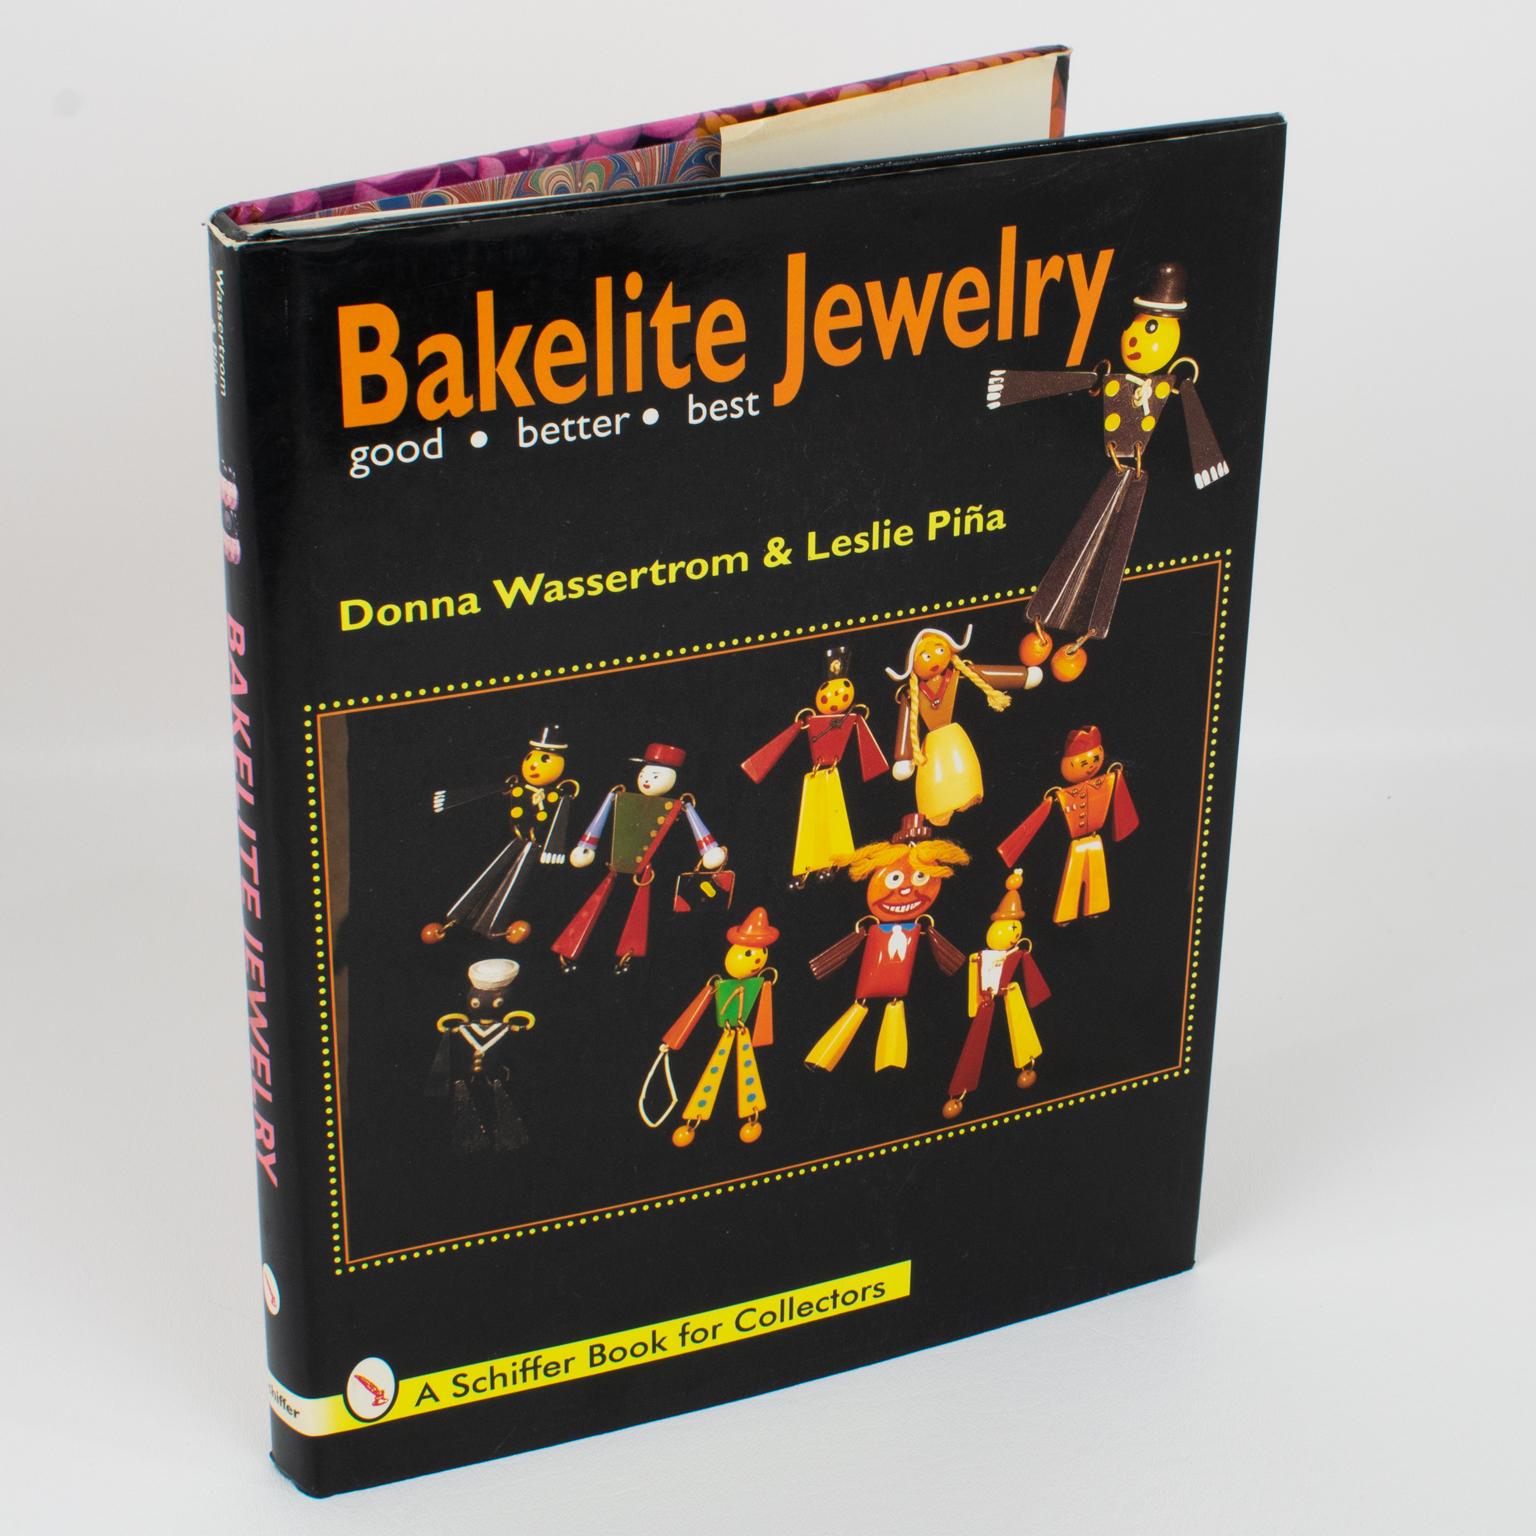 Bakelite Jewelry, Good - Better - Best, English book by Donna Wassertrom and Leslie Pina, 1997.
Bakelite jewelry was popular during The Depression because it was decorative, fun, and very affordable. Today, it is sought after and worn for the same